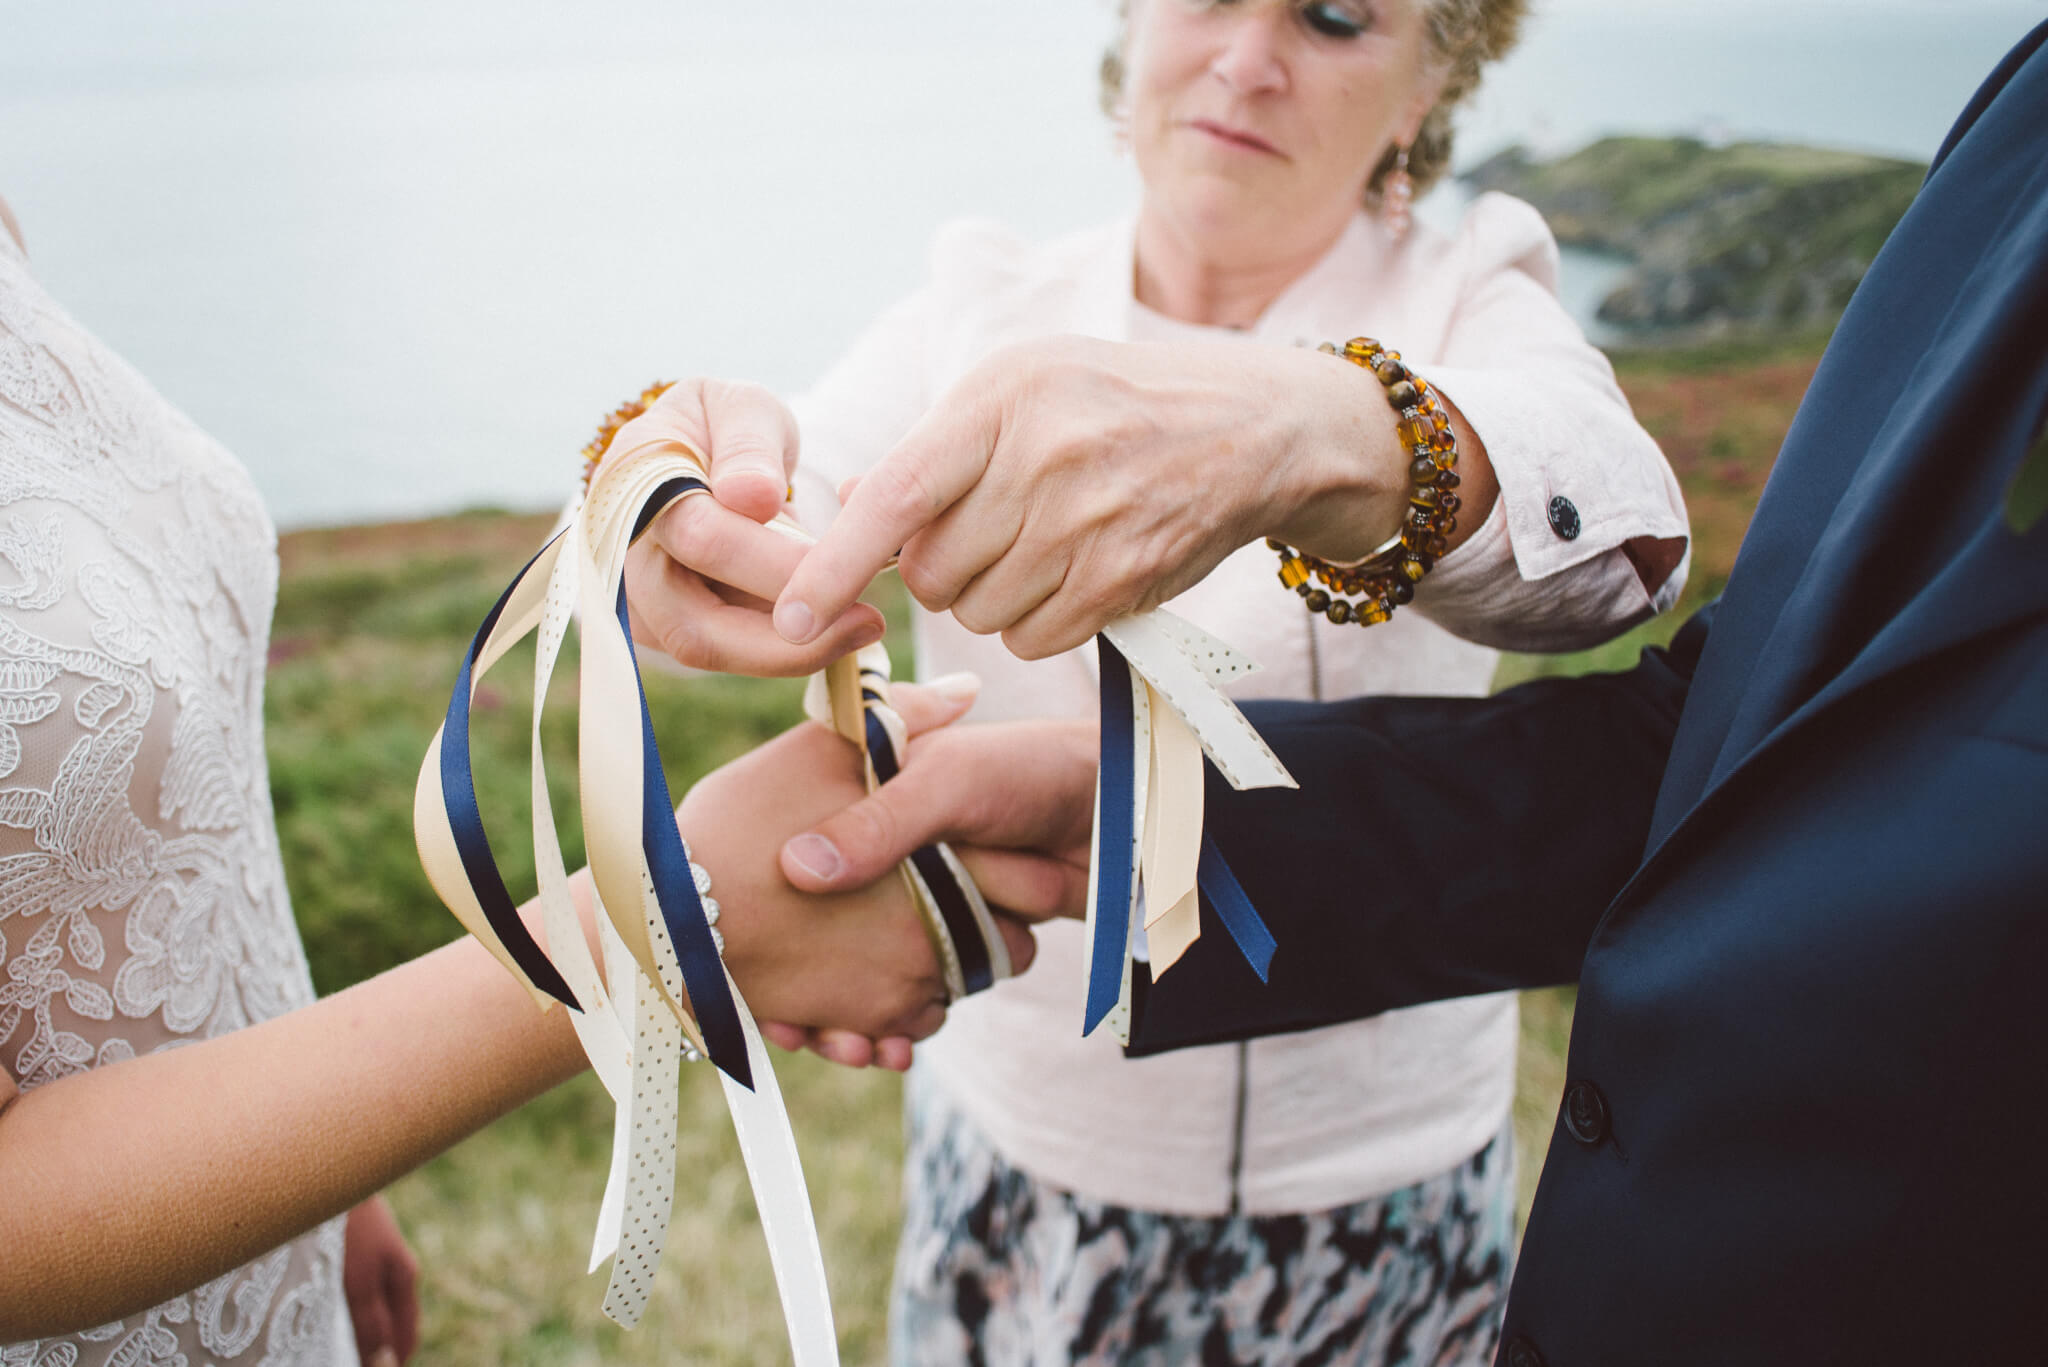 5 Irish Wedding Traditions to Include in Your Ceremony